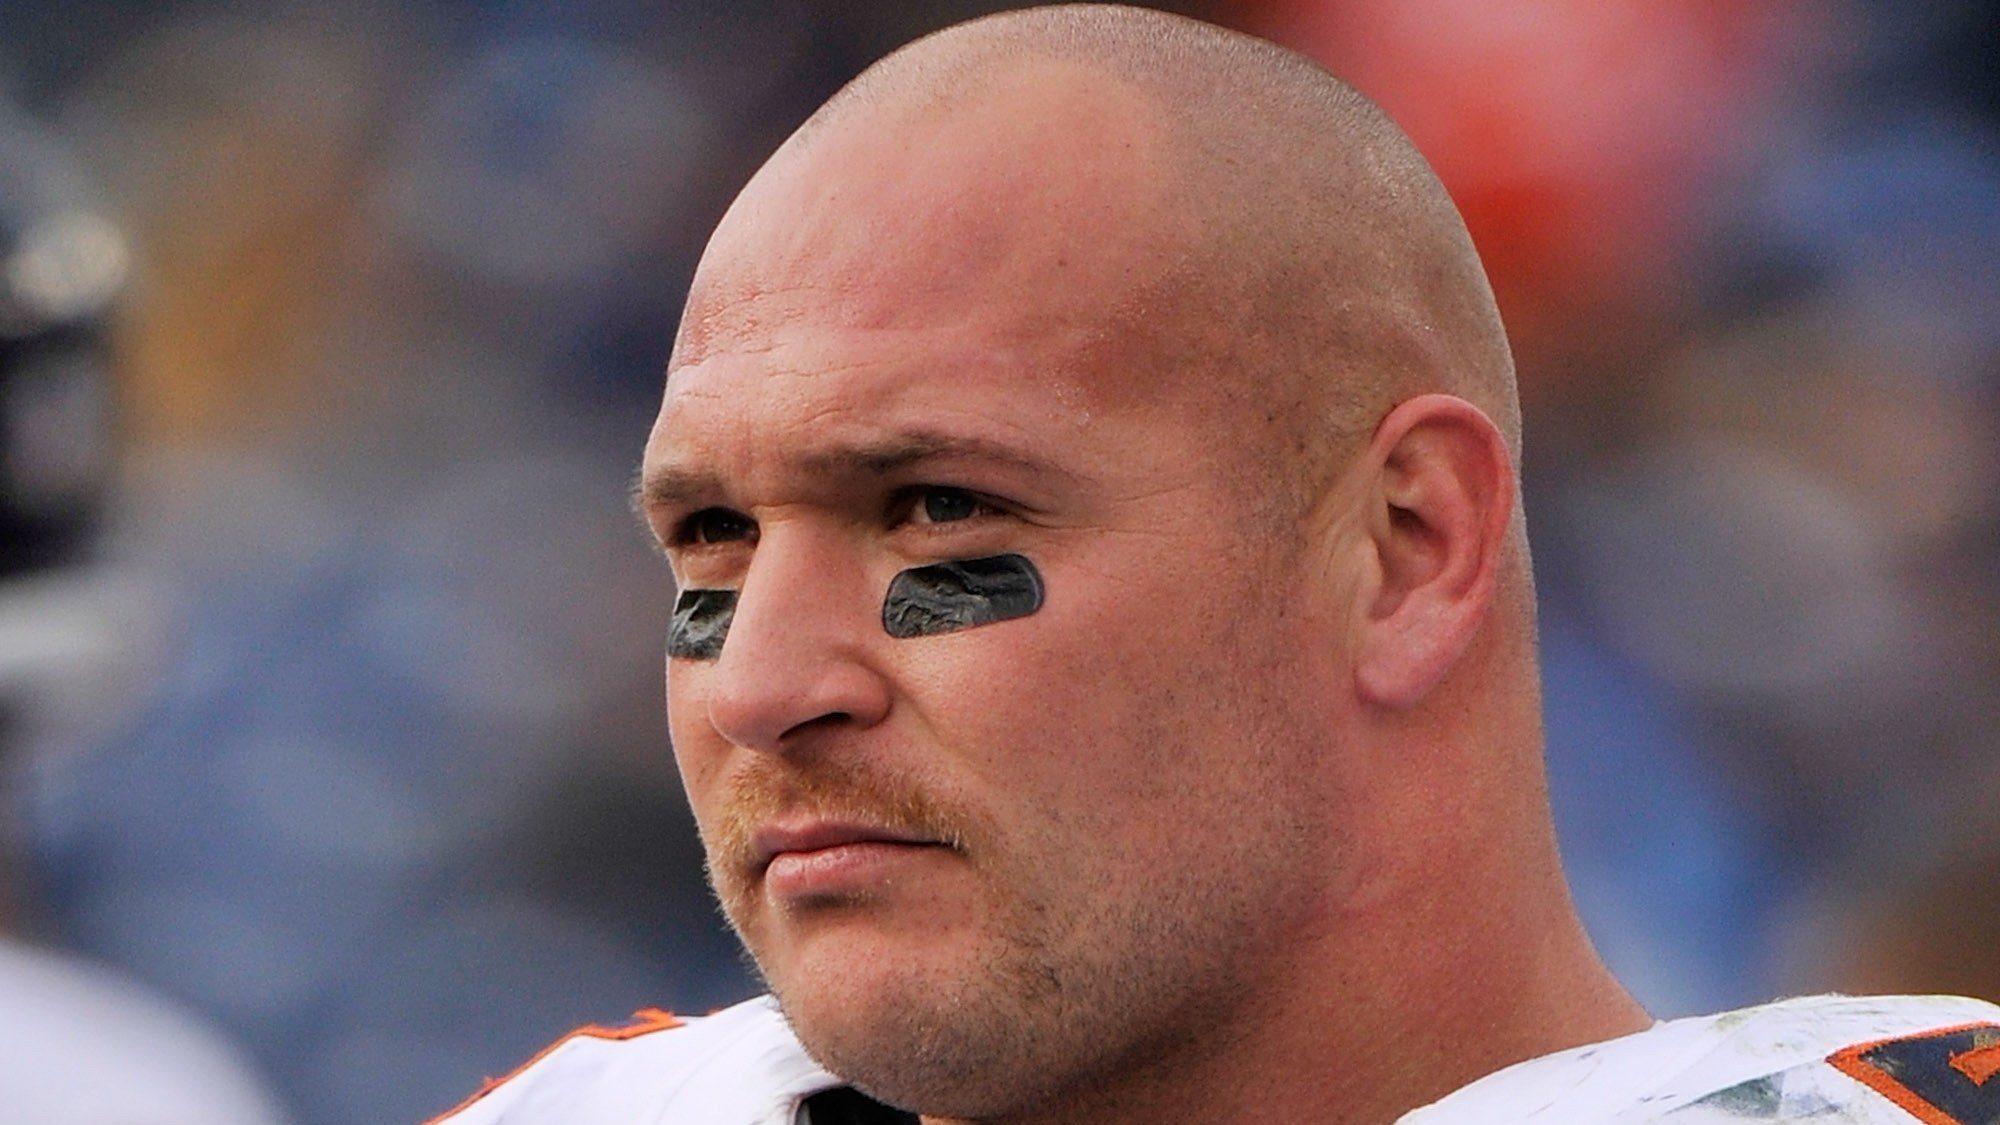 Brian Urlacher Had Surgery For Hours To Get His Hair Back Gq